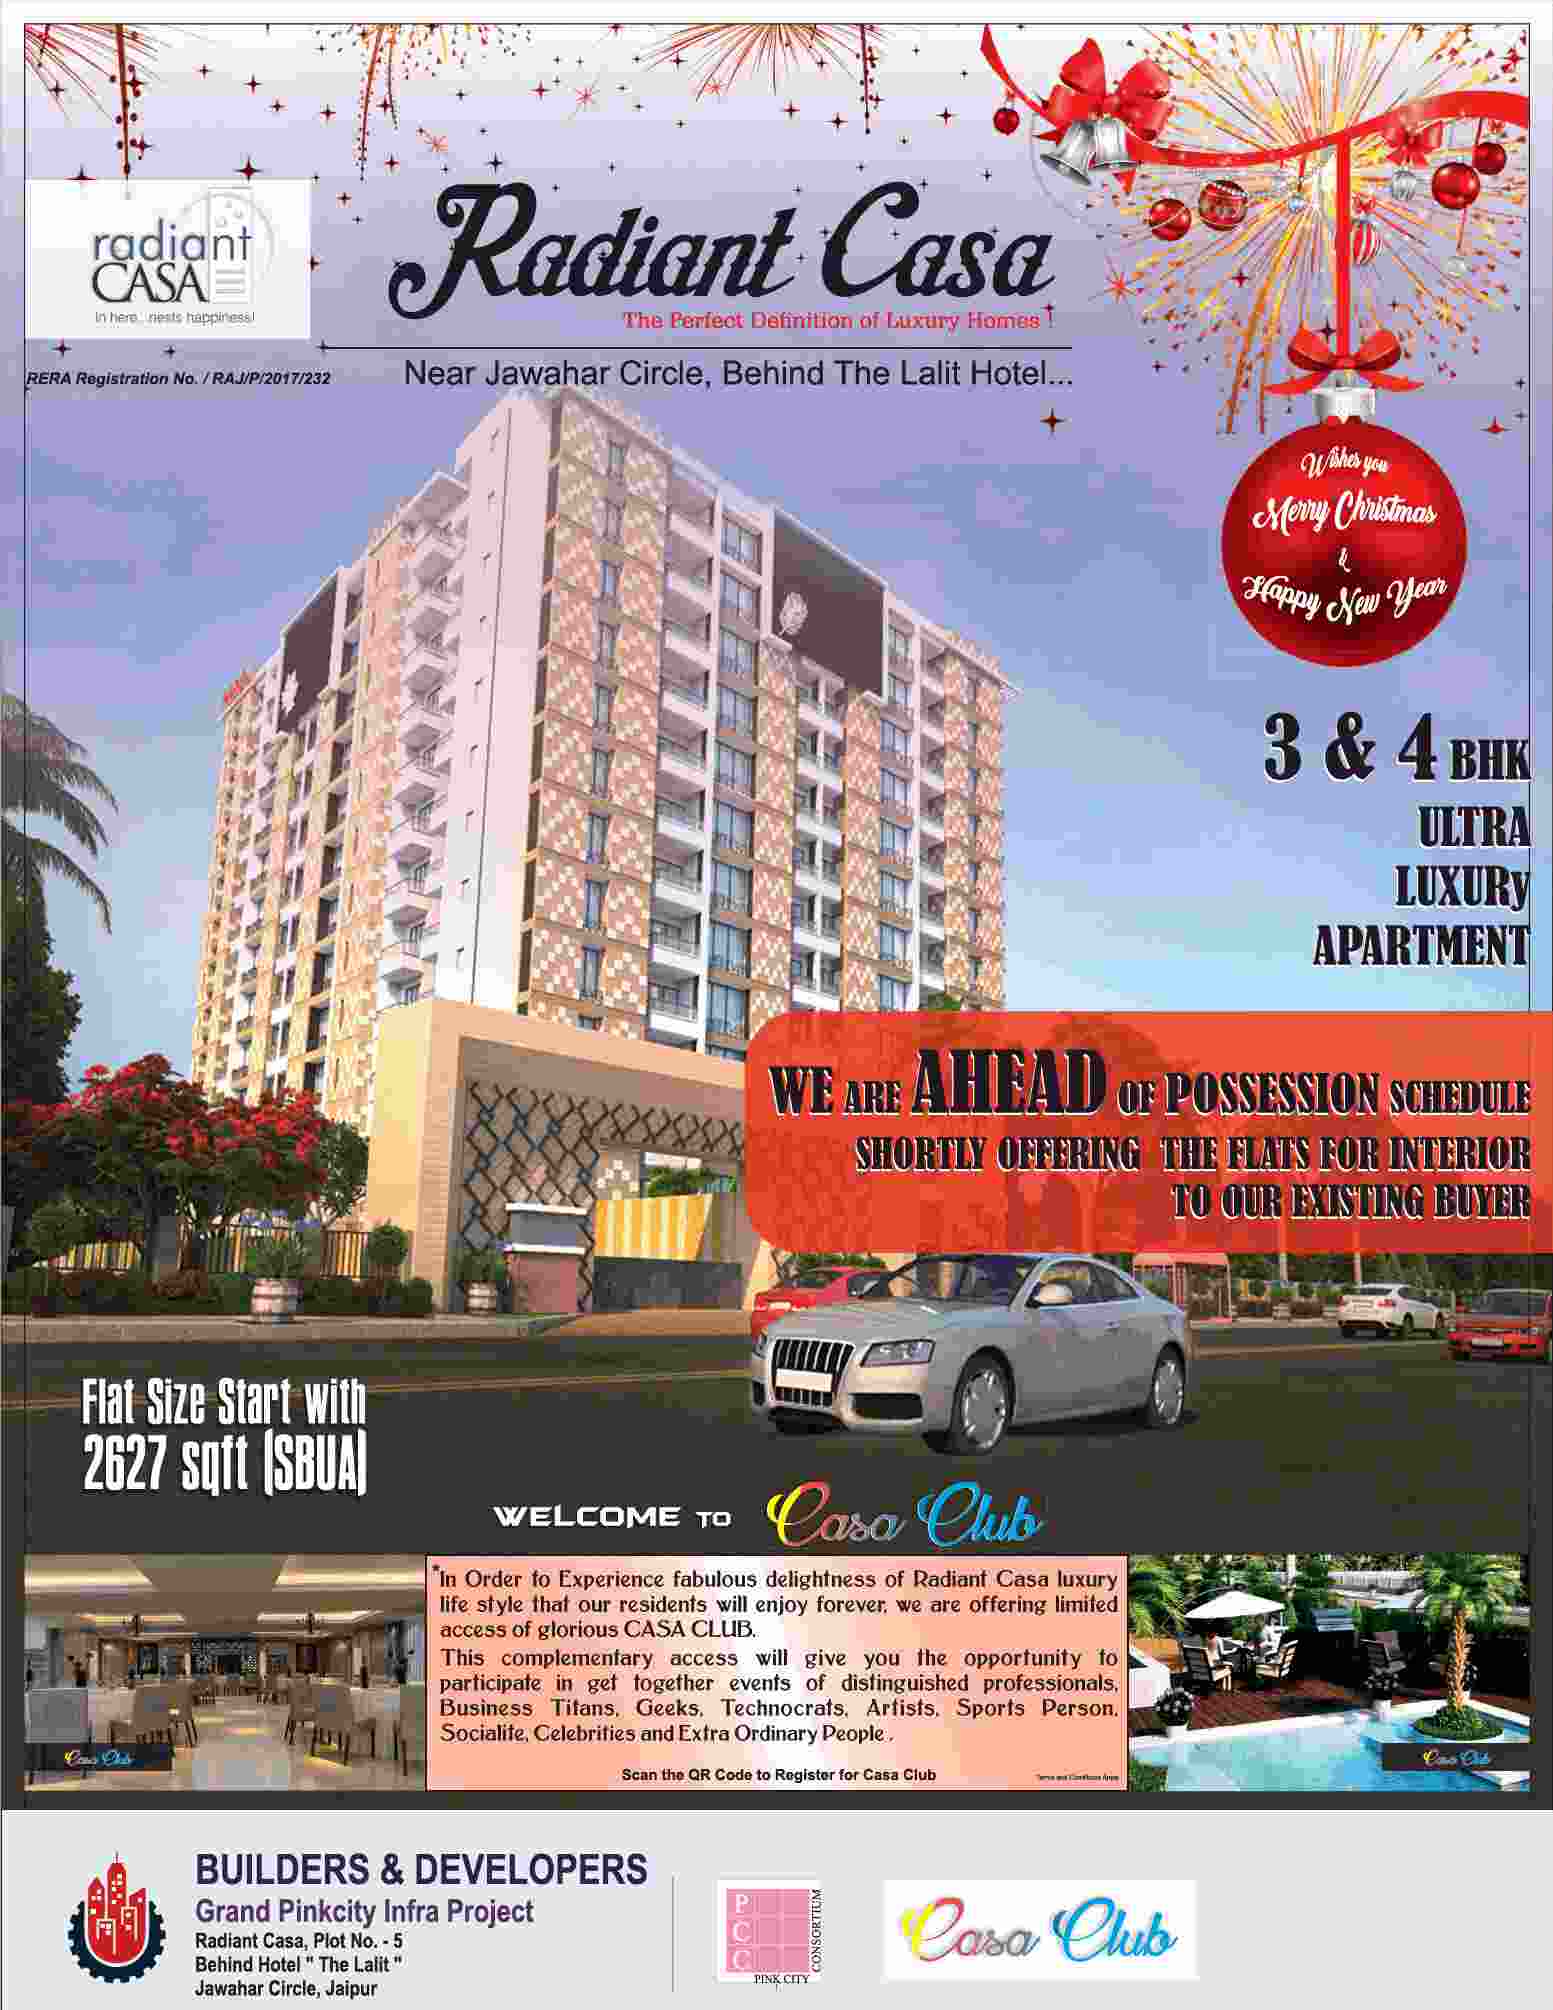 Welcome to Casa Club at Pink Radiant Casa in Jaipur Update